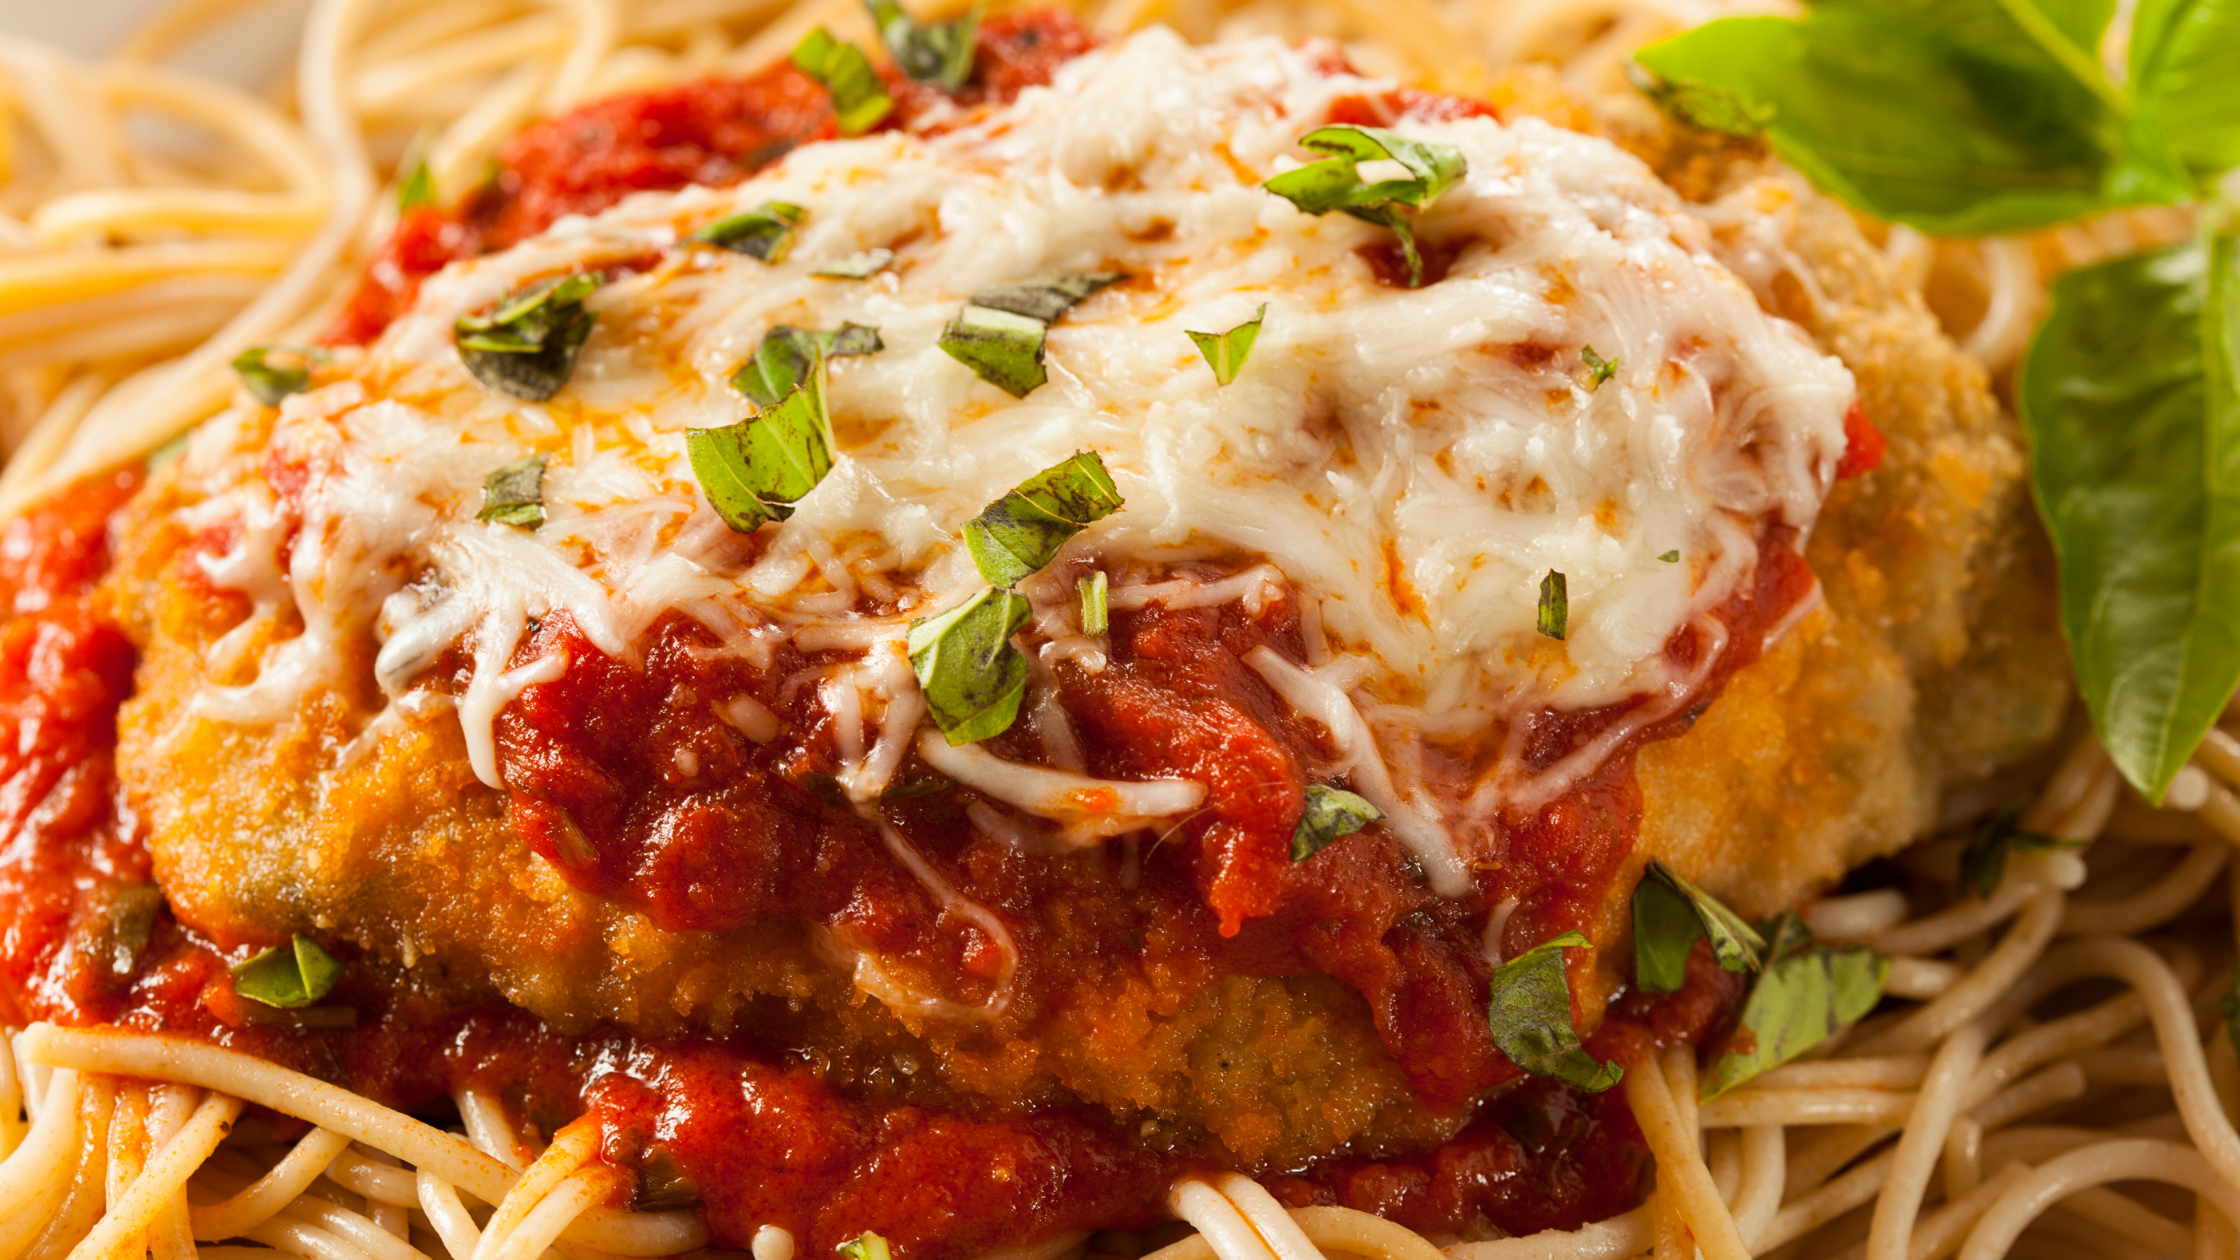 Low Calorie Chicken Parmesan with Whole Grain Spaghetti: A Healthy Recipe for Delicious Italian Food 2